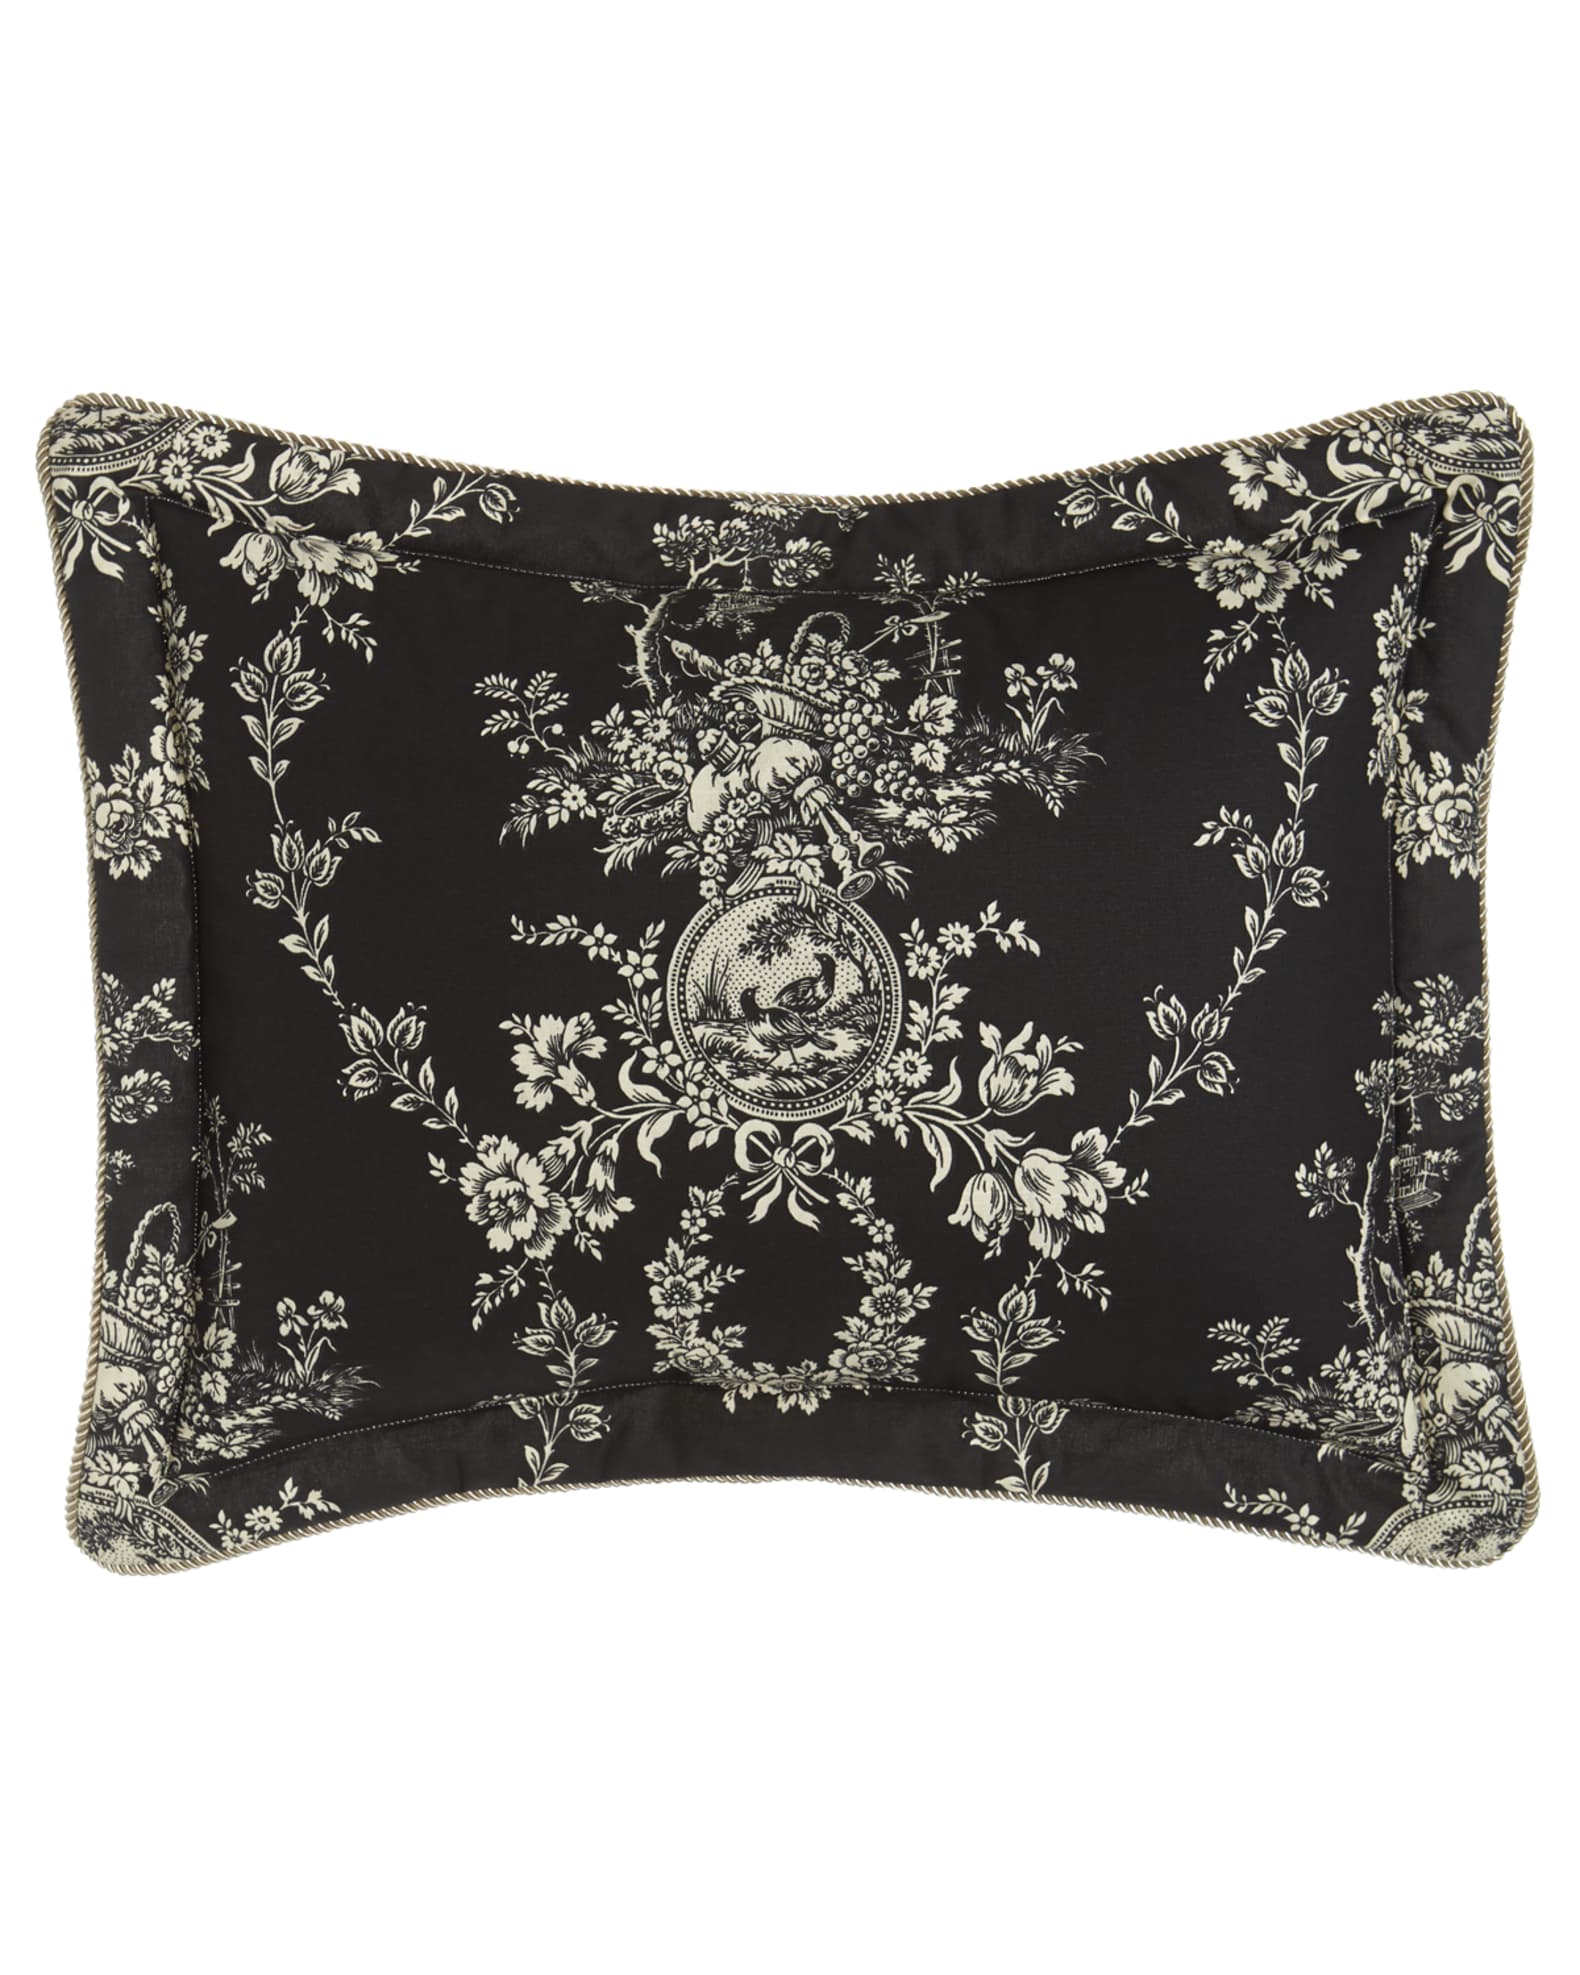 French Country Pillow Covers, Linen Bedding, Black Toile De Jouy